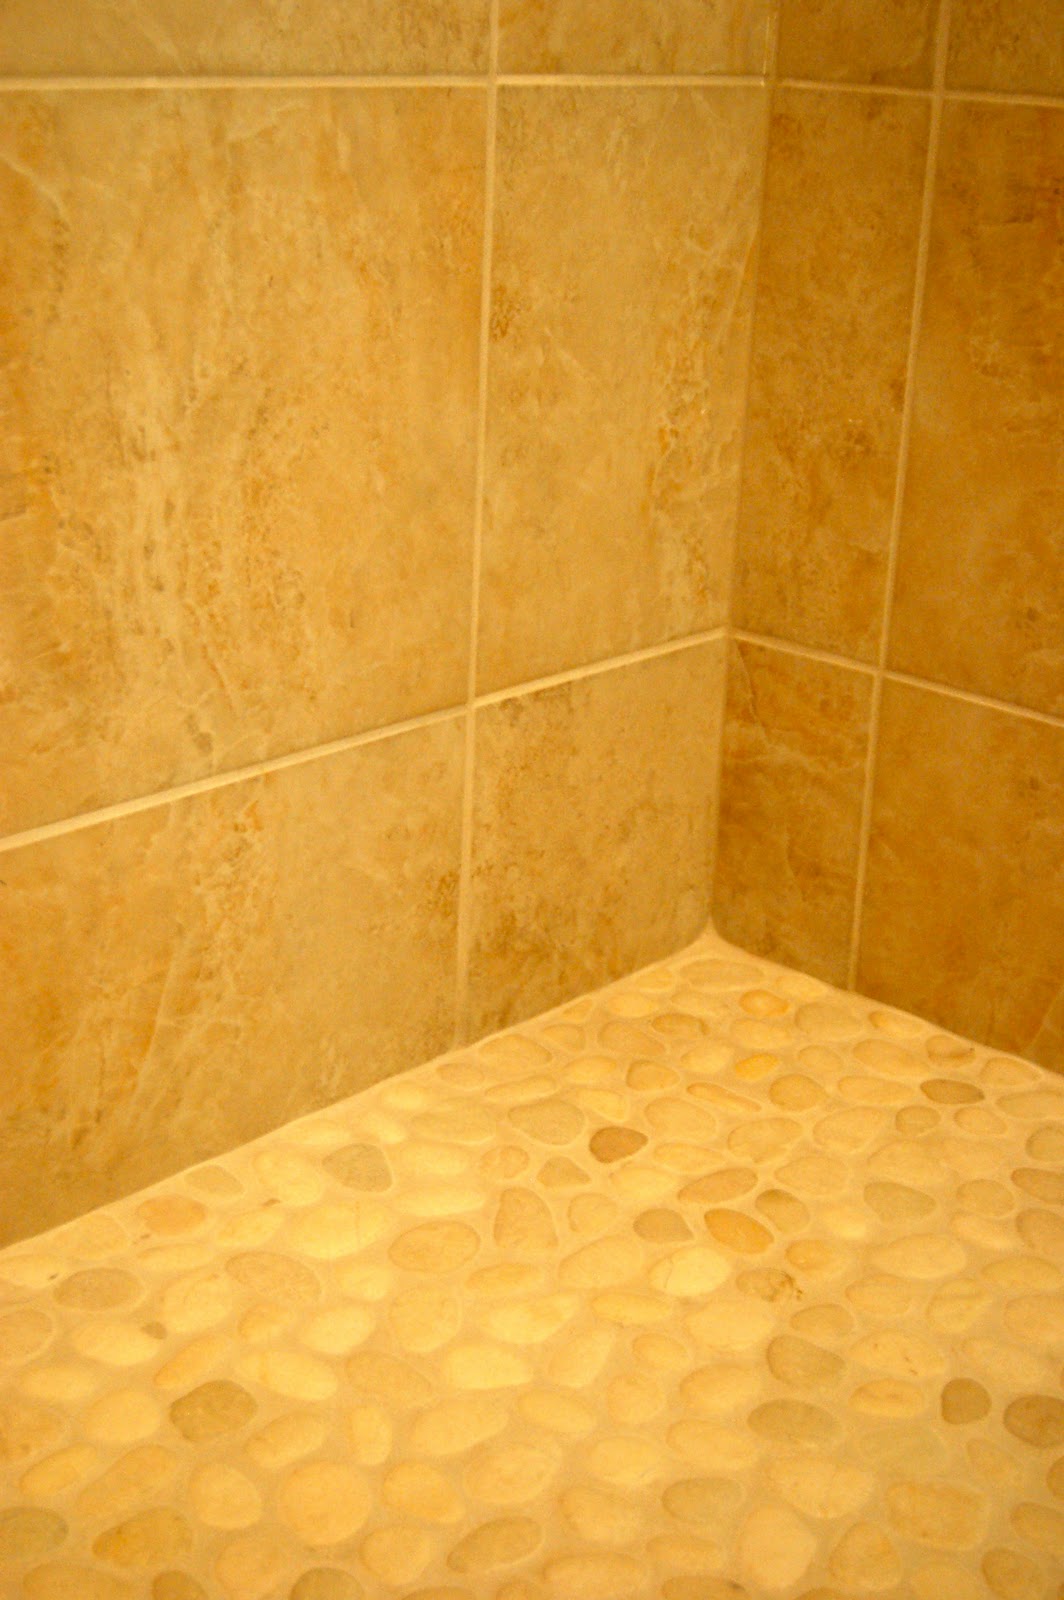 bathroom shower heads also had a teak seat installed that folds up and down. It supposedly 